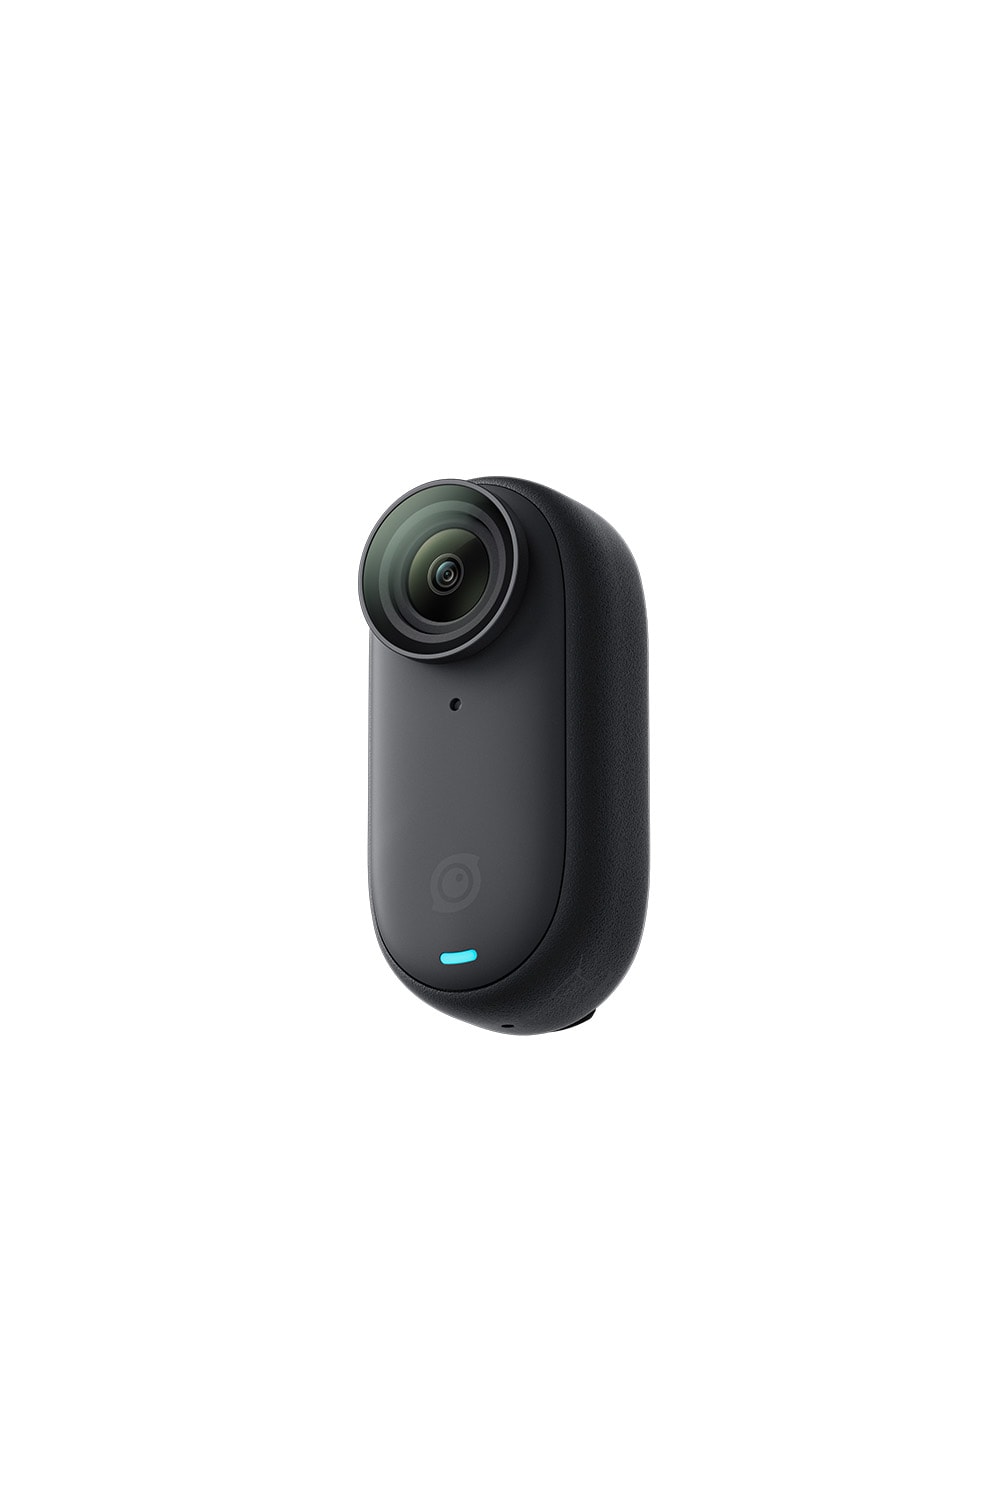 Insta360's Tiny 2.7K GO 3 Action Camera is Now Available in Black